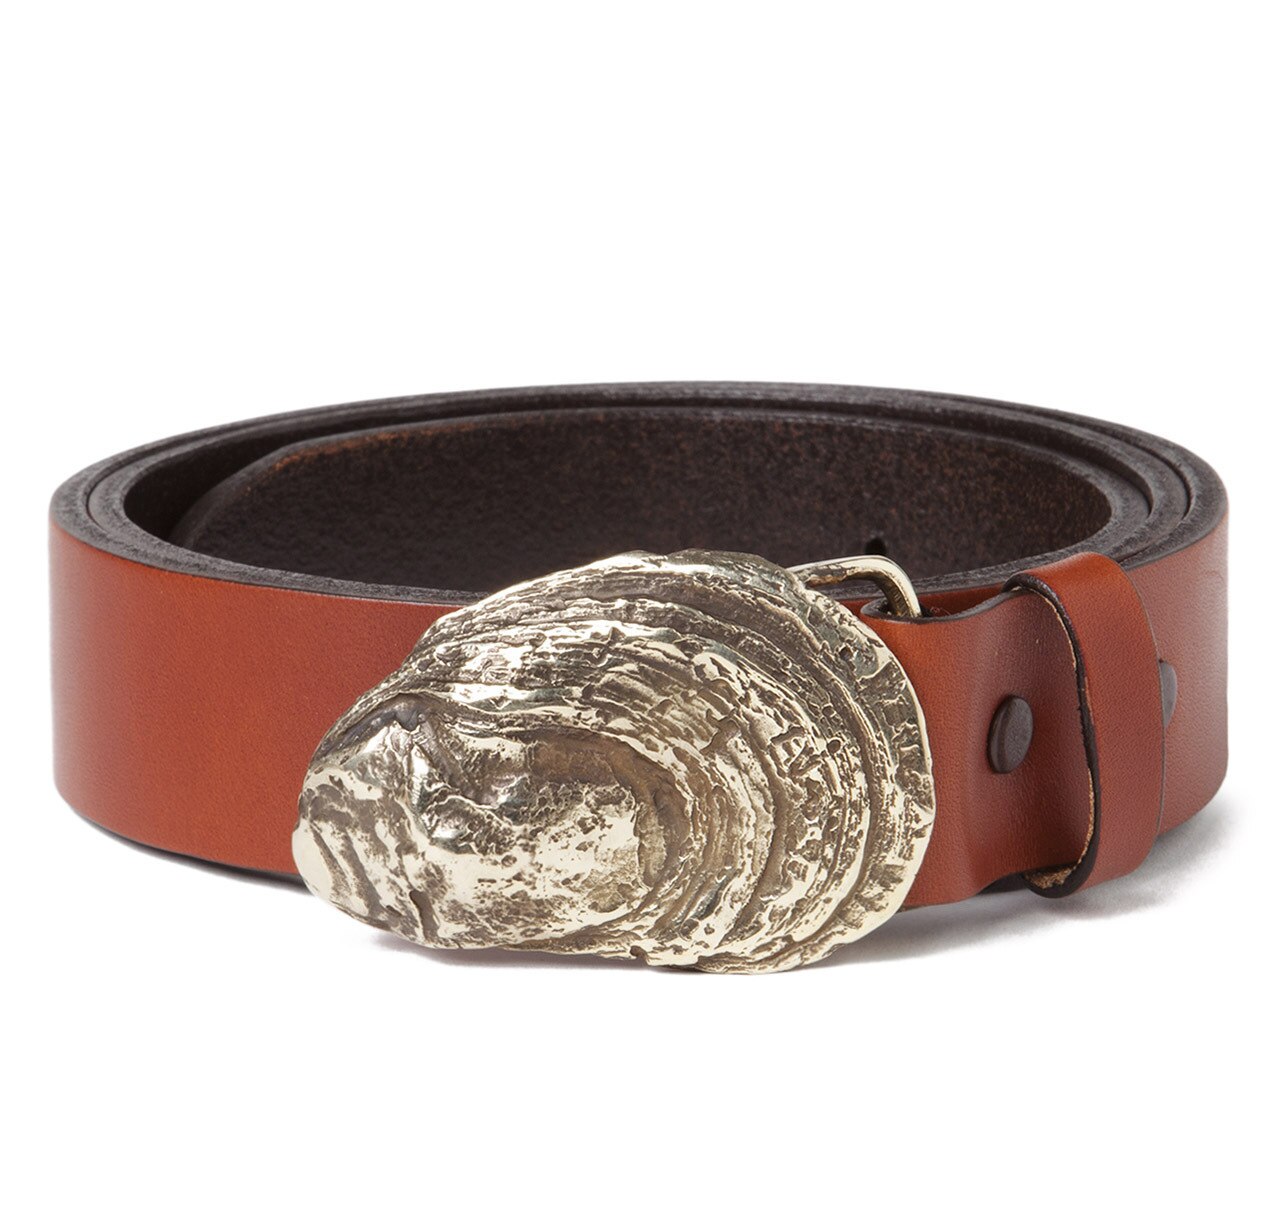 Oyster Shell Buckle with Antique Tan Leather Belt